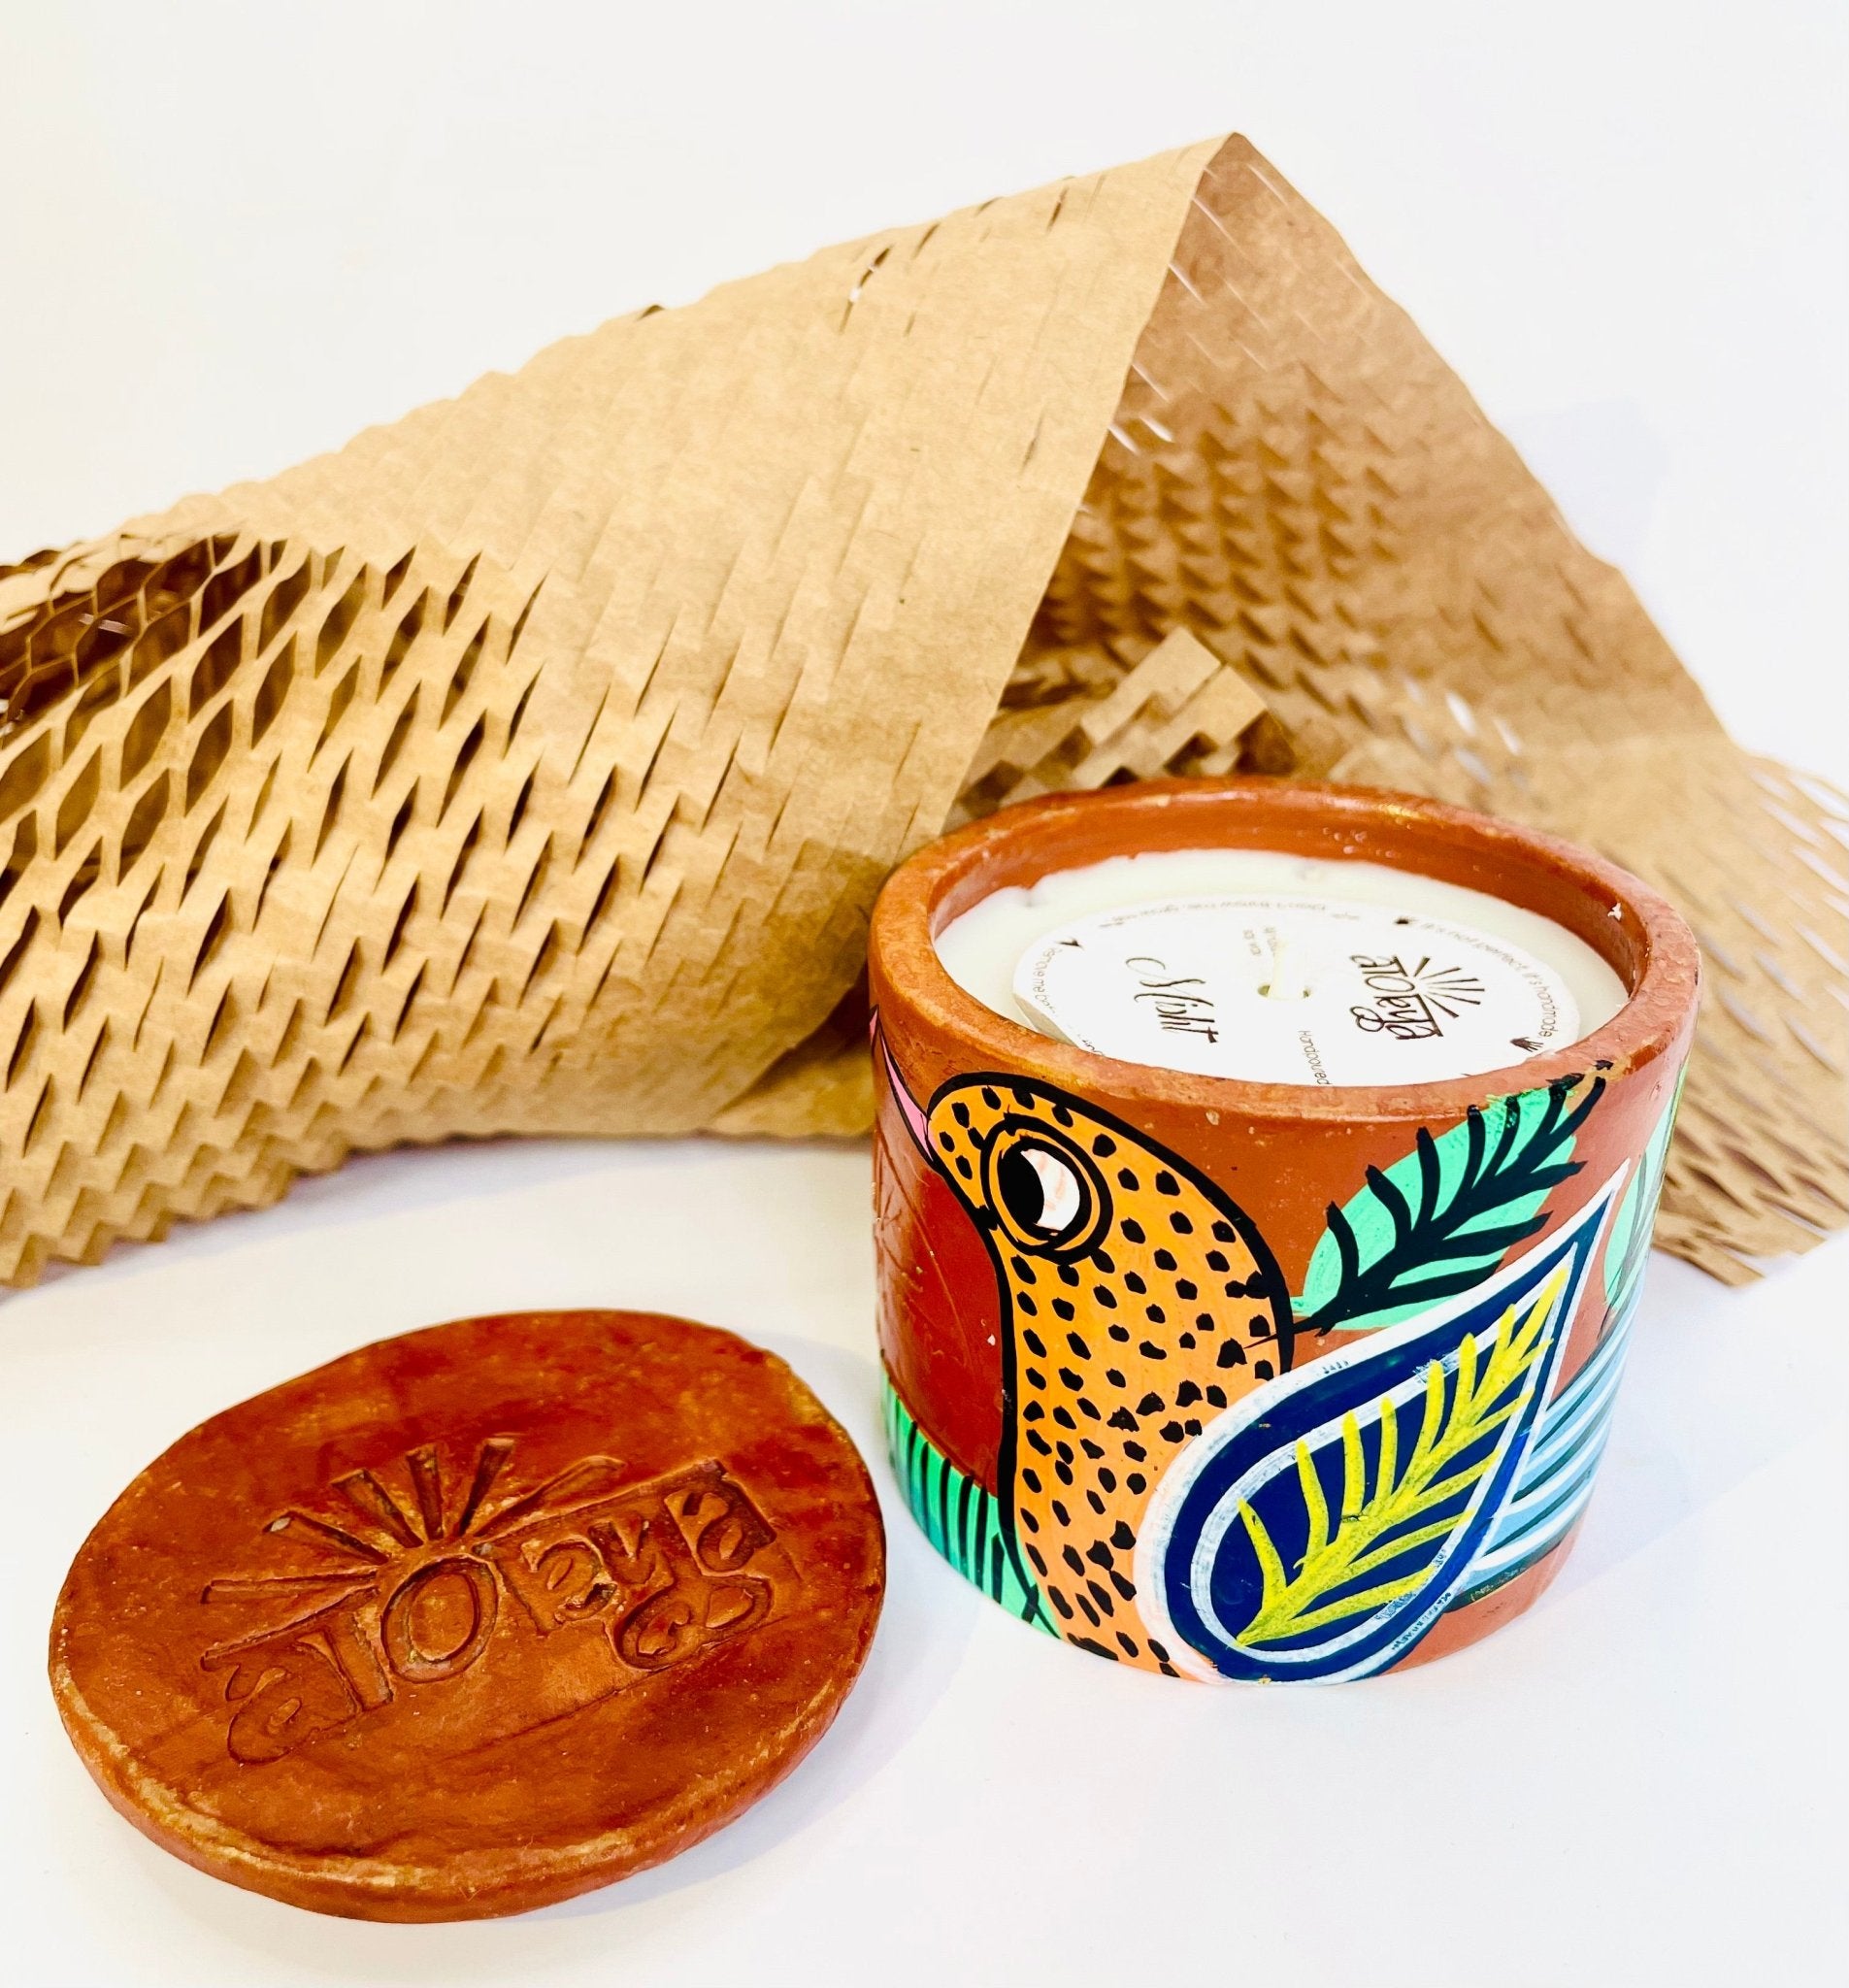 100% natural soy wax scented candle in a terracotta jar hand-painted with an orange bird having blue and yellow feathers is covered with a seed paper candle dust cover while honeycomb paper and candle snuffer is placed around the candle